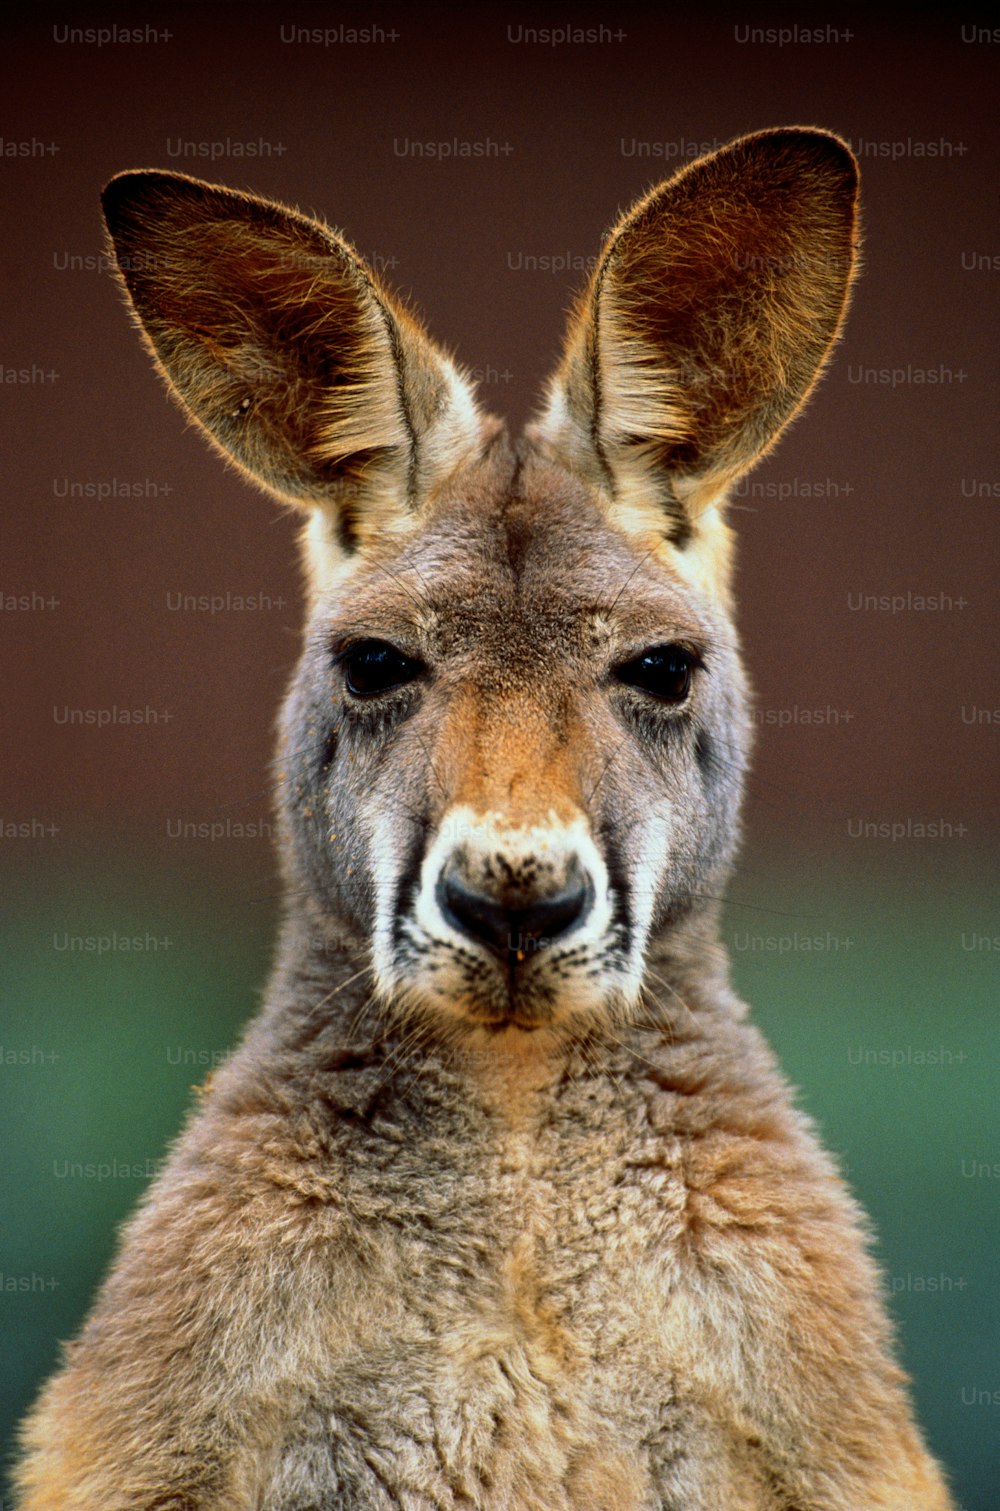 Kangaroos are marsupials native to Australia and nearby islands. They have large, powerful hind legs which are used for hopping; a large kangaroo can jump 9 metres (30 feet), and long tails which are used for balance and support.